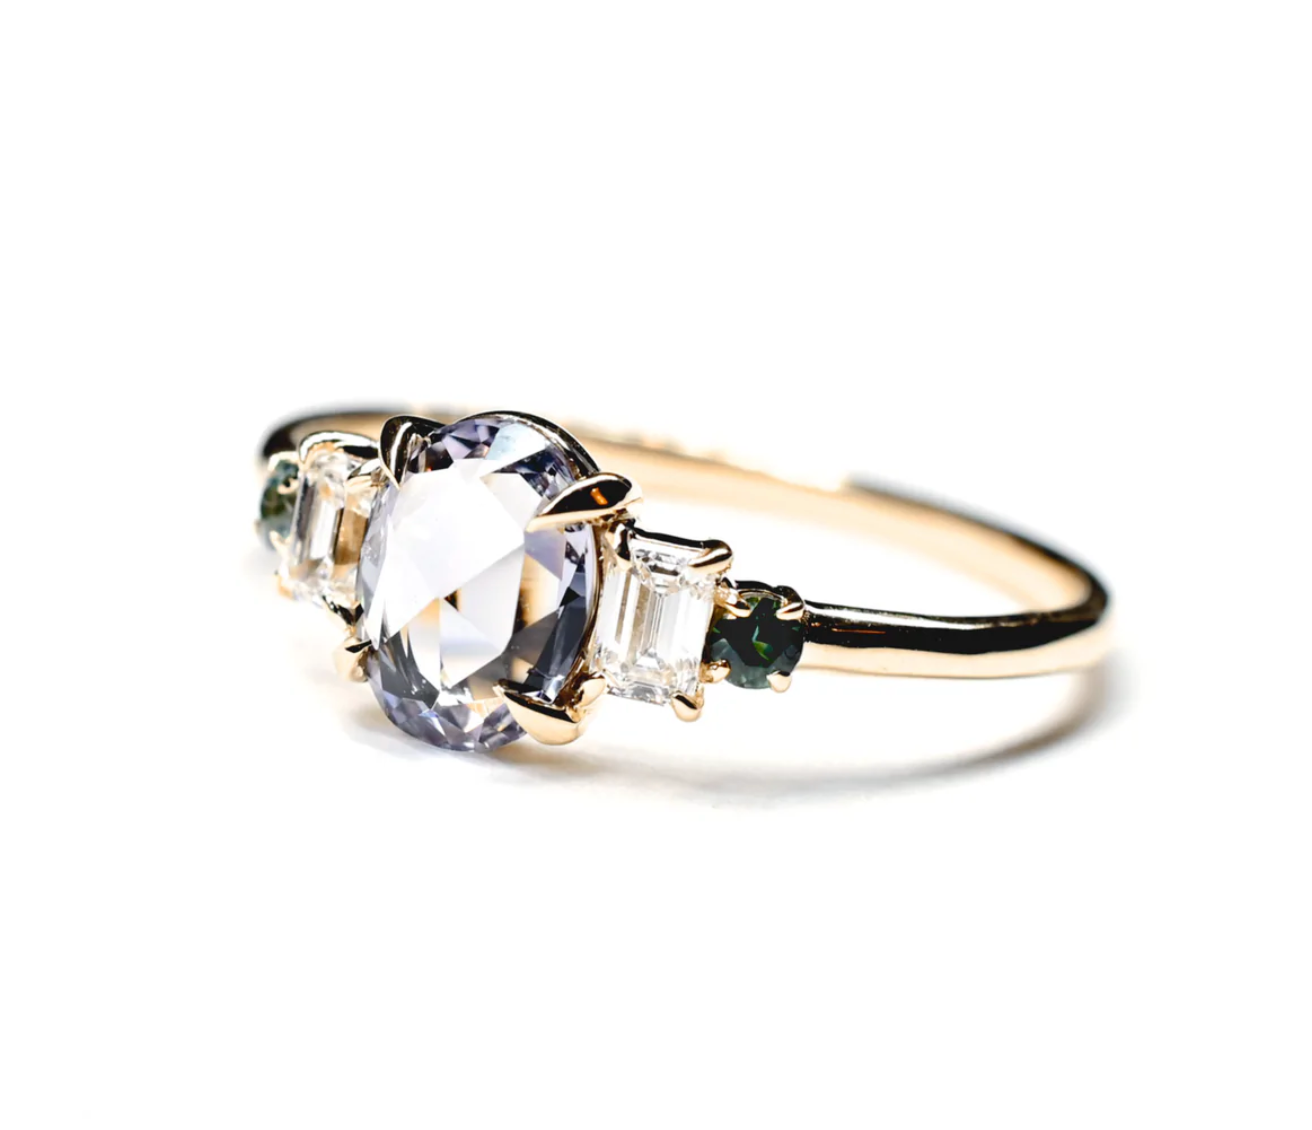 Load image into Gallery viewer, a yellow gold five stone ring featuring an oval spinel centerstone, two baguette white diamonds, and two round teal sapphires, sitting on a white background
